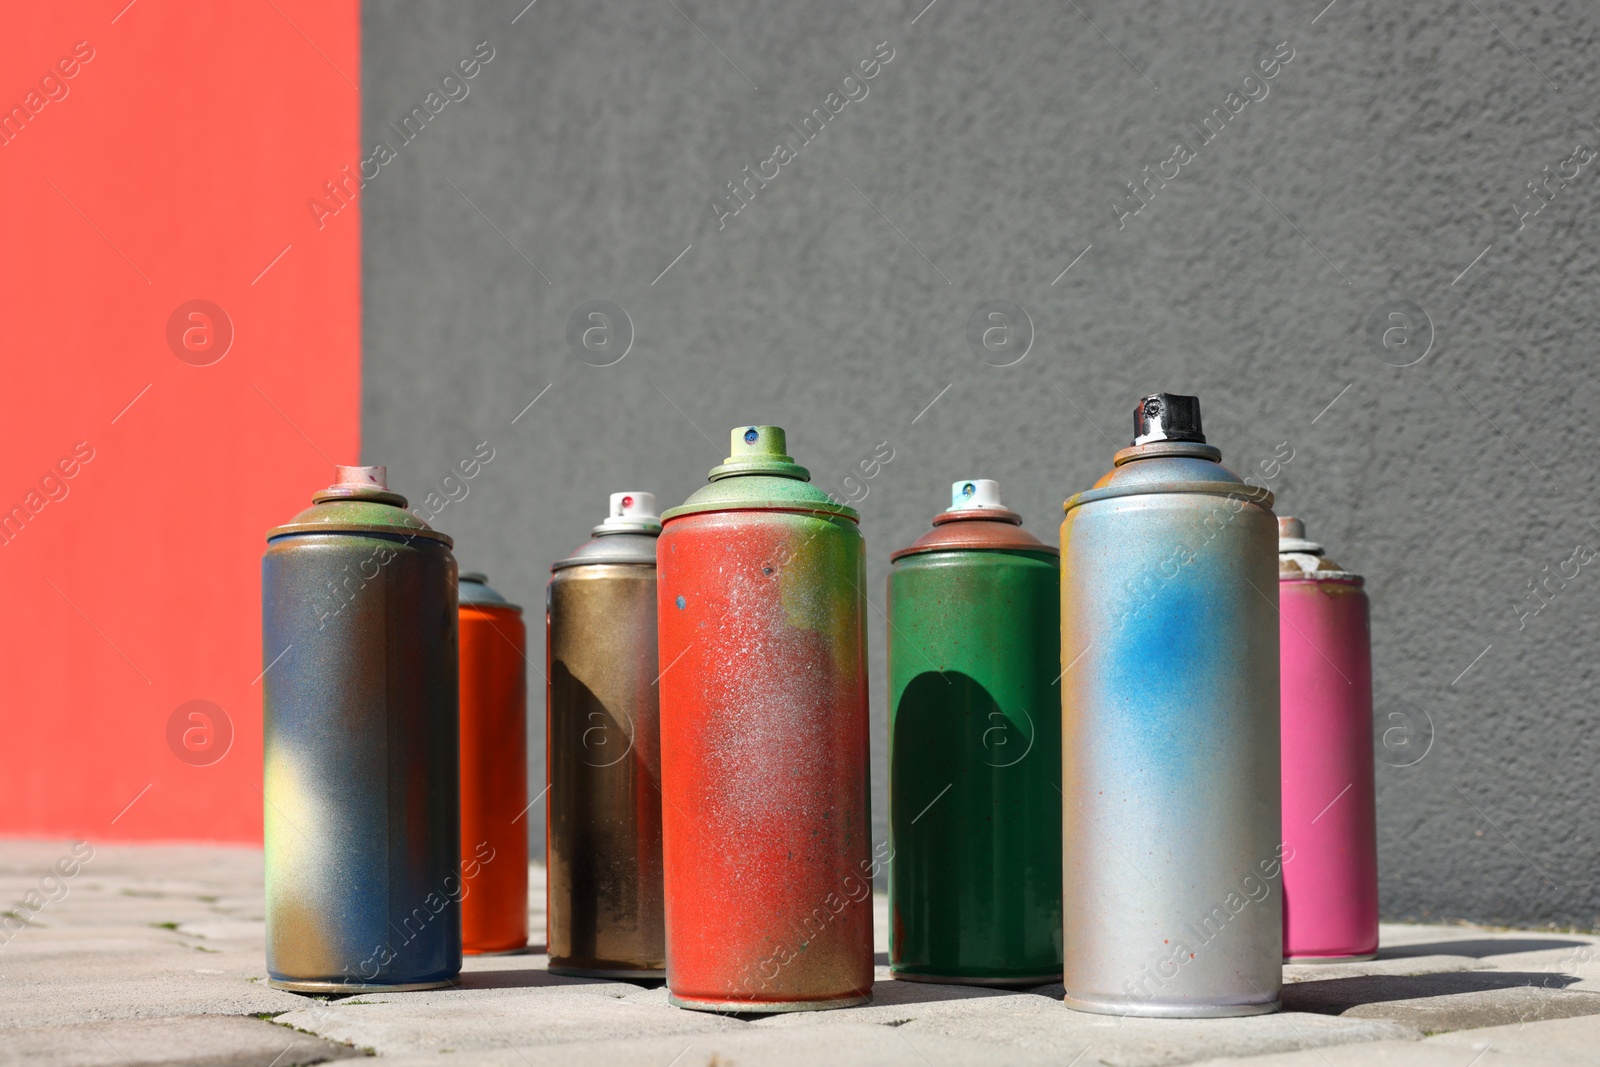 Photo of Cans of different spray paints on pavement near wall